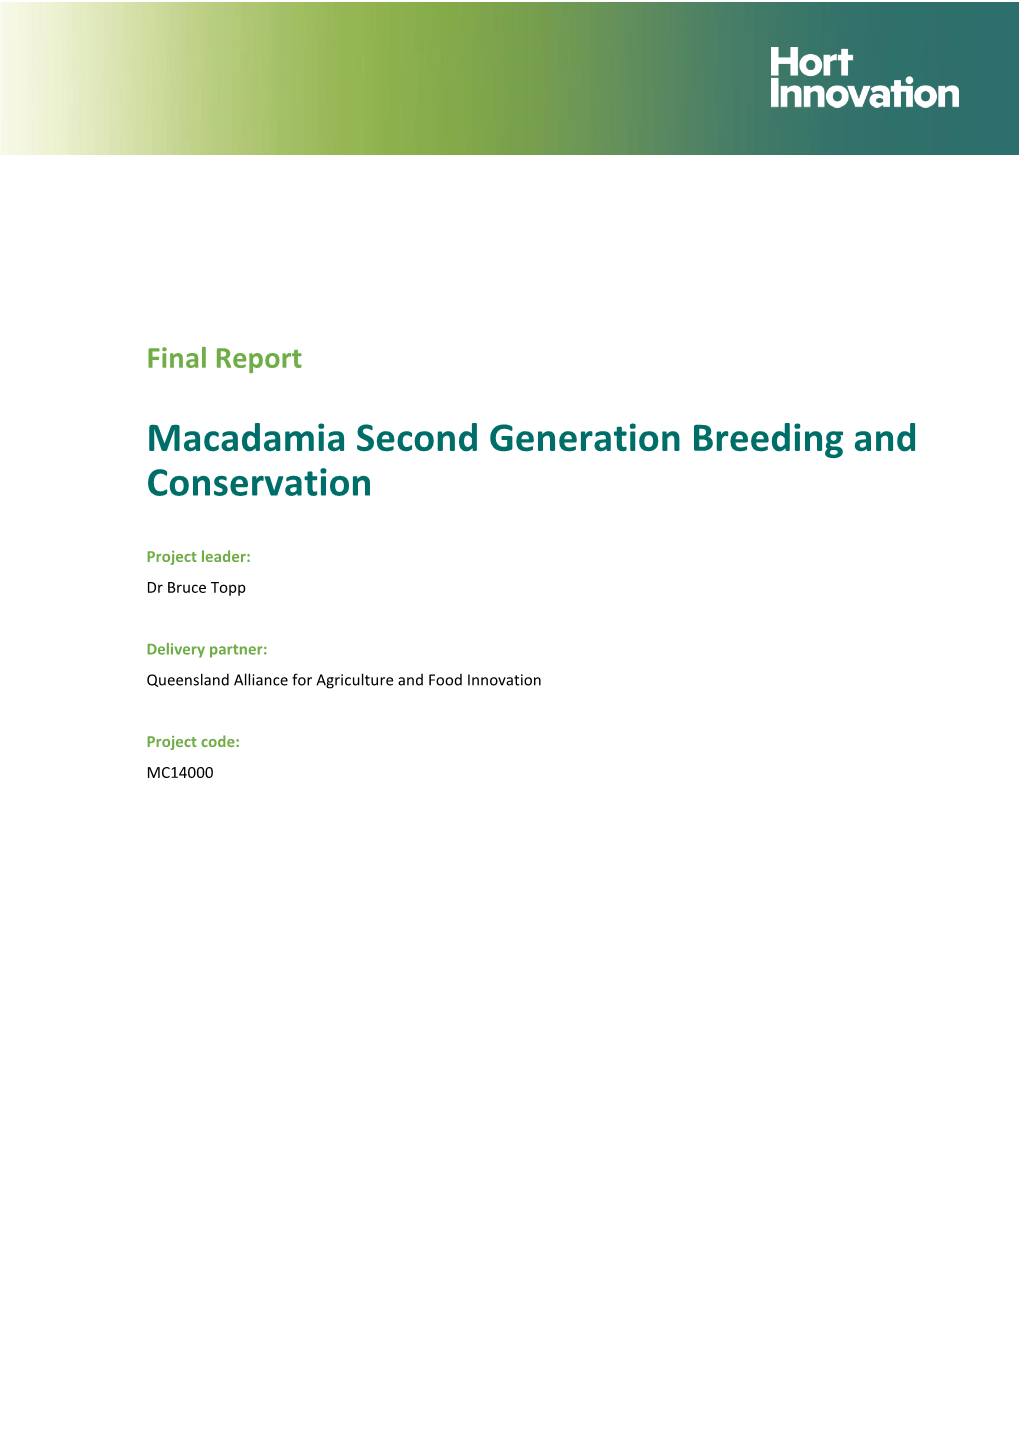 Macadamia Second Generation Breeding and Conservation